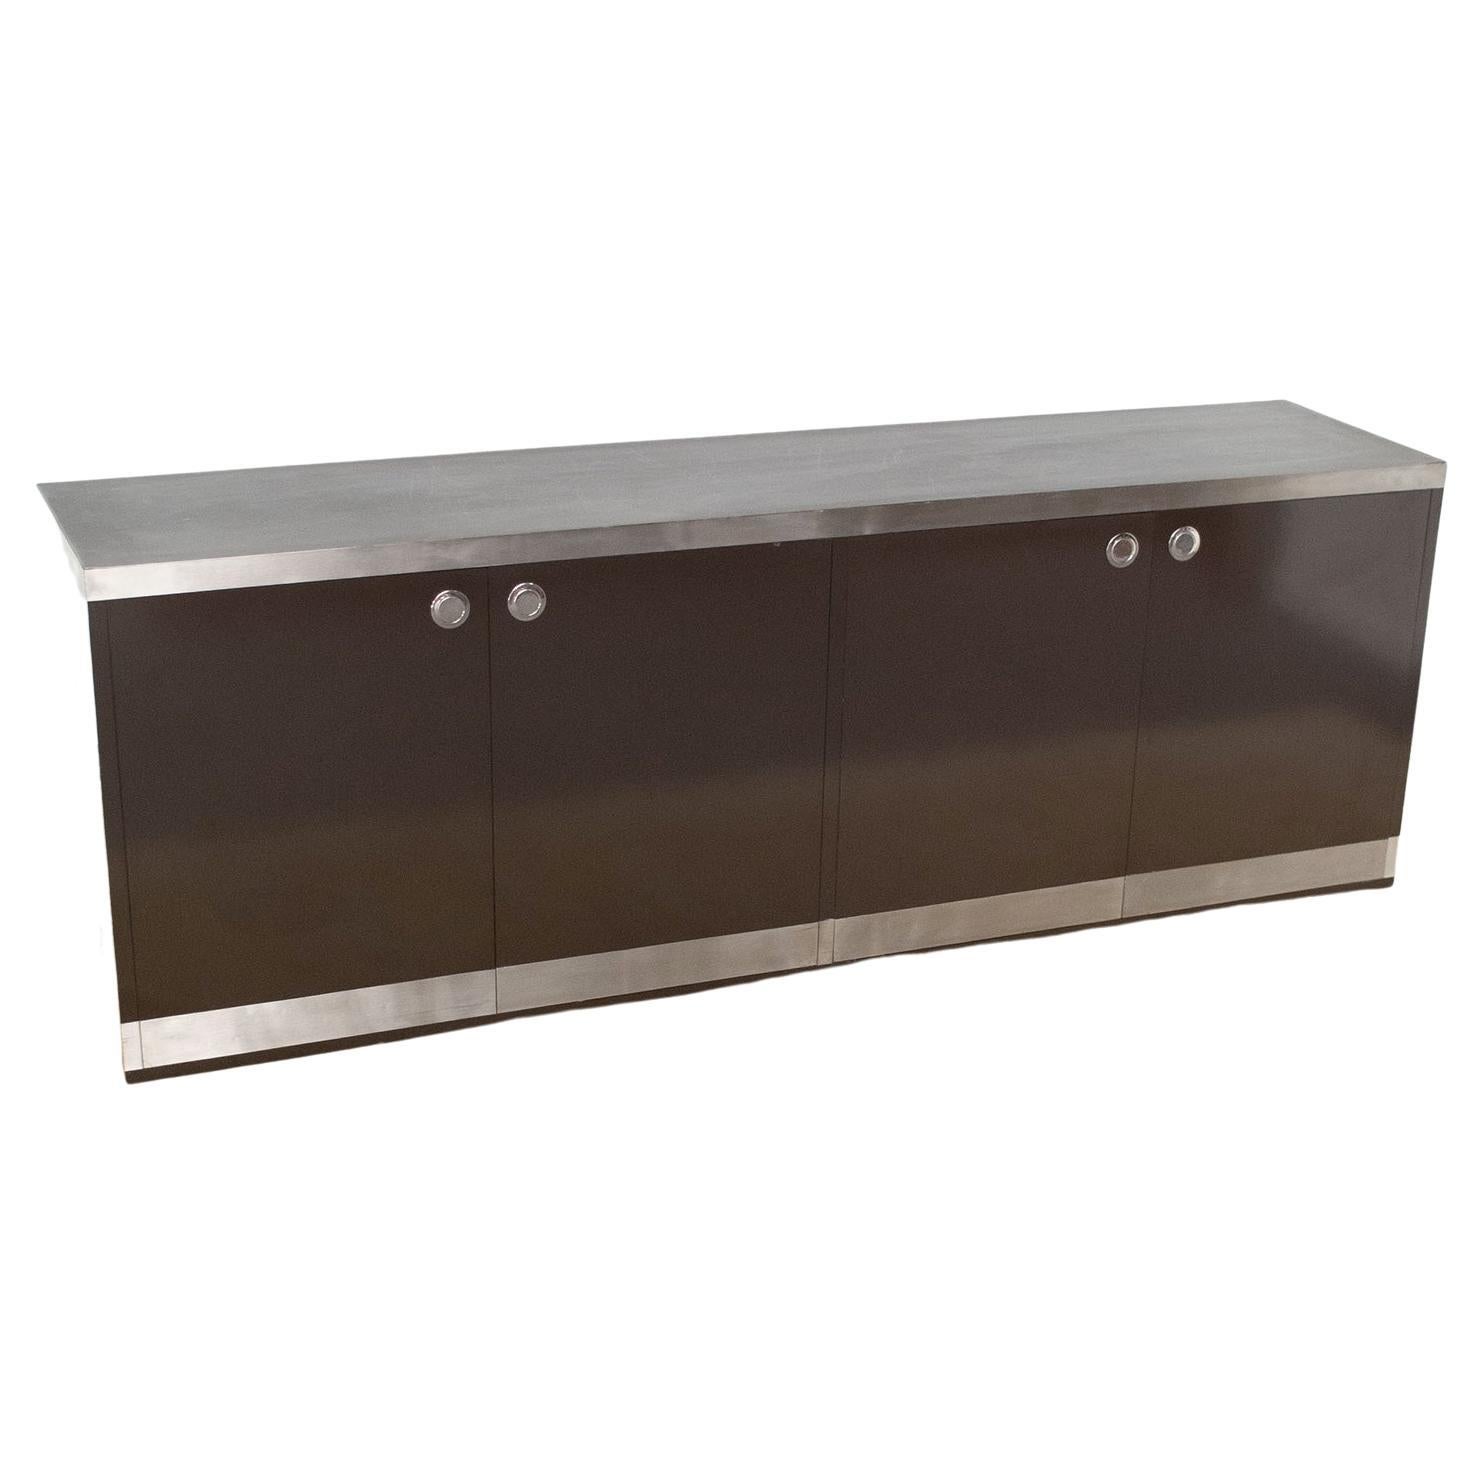 Sideboard in glossy brown lacquered wood with four doors with four drawers, steel handles with satin aluminum edges designer Willy Rizzo for Sabot Italia.